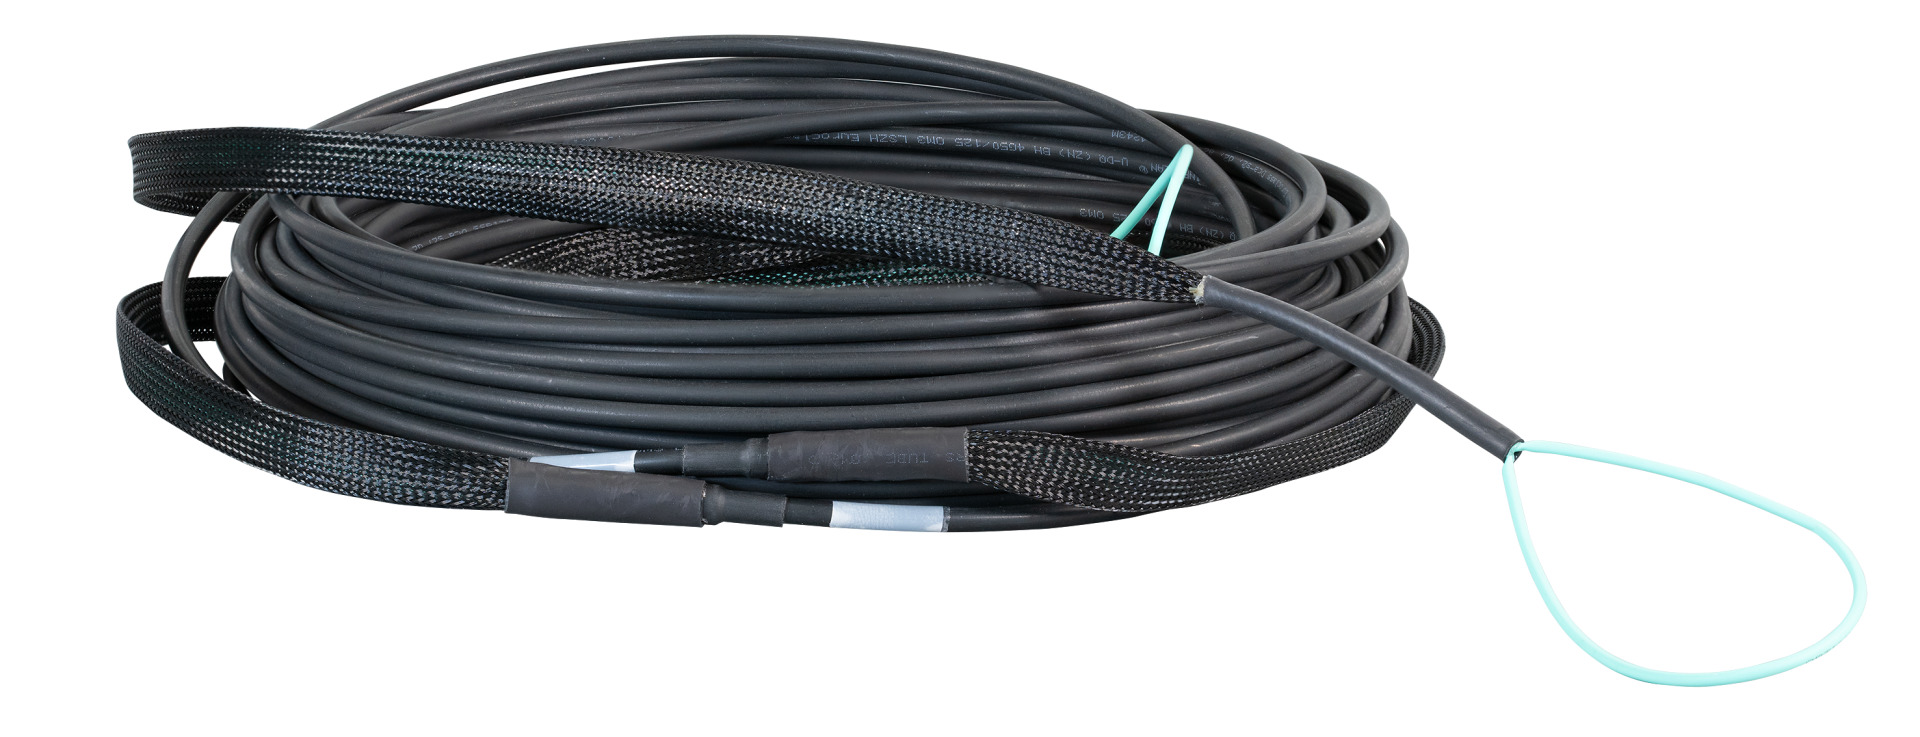 Trunk cable U-DQ(ZN)BH 8G 50/125, LC/LC OM3 100m